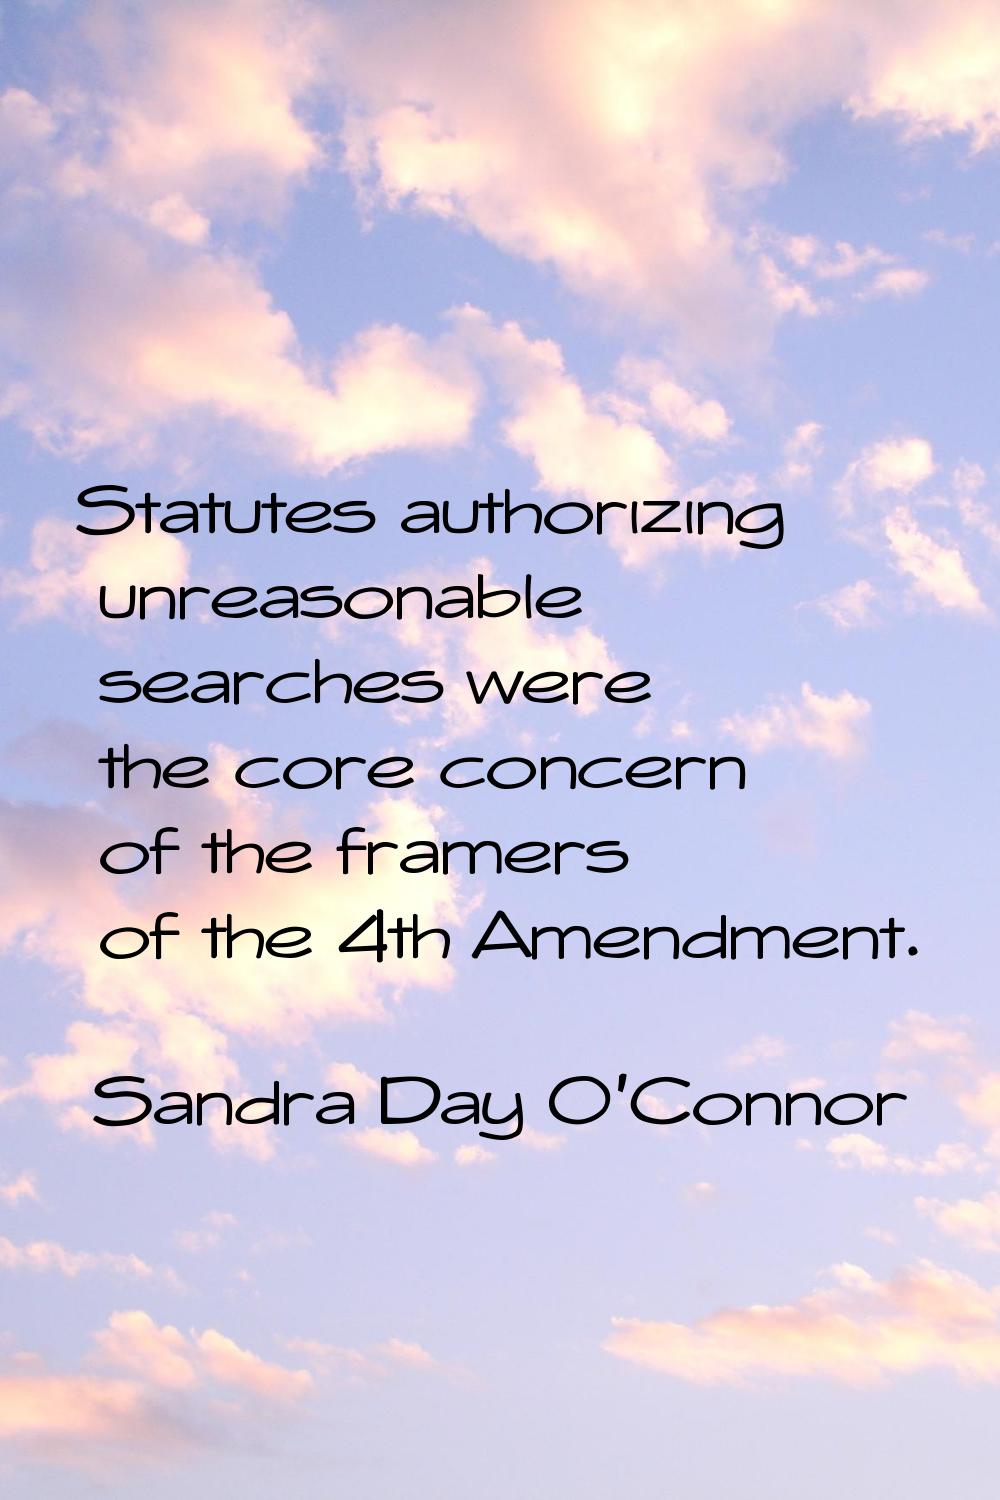 Statutes authorizing unreasonable searches were the core concern of the framers of the 4th Amendmen